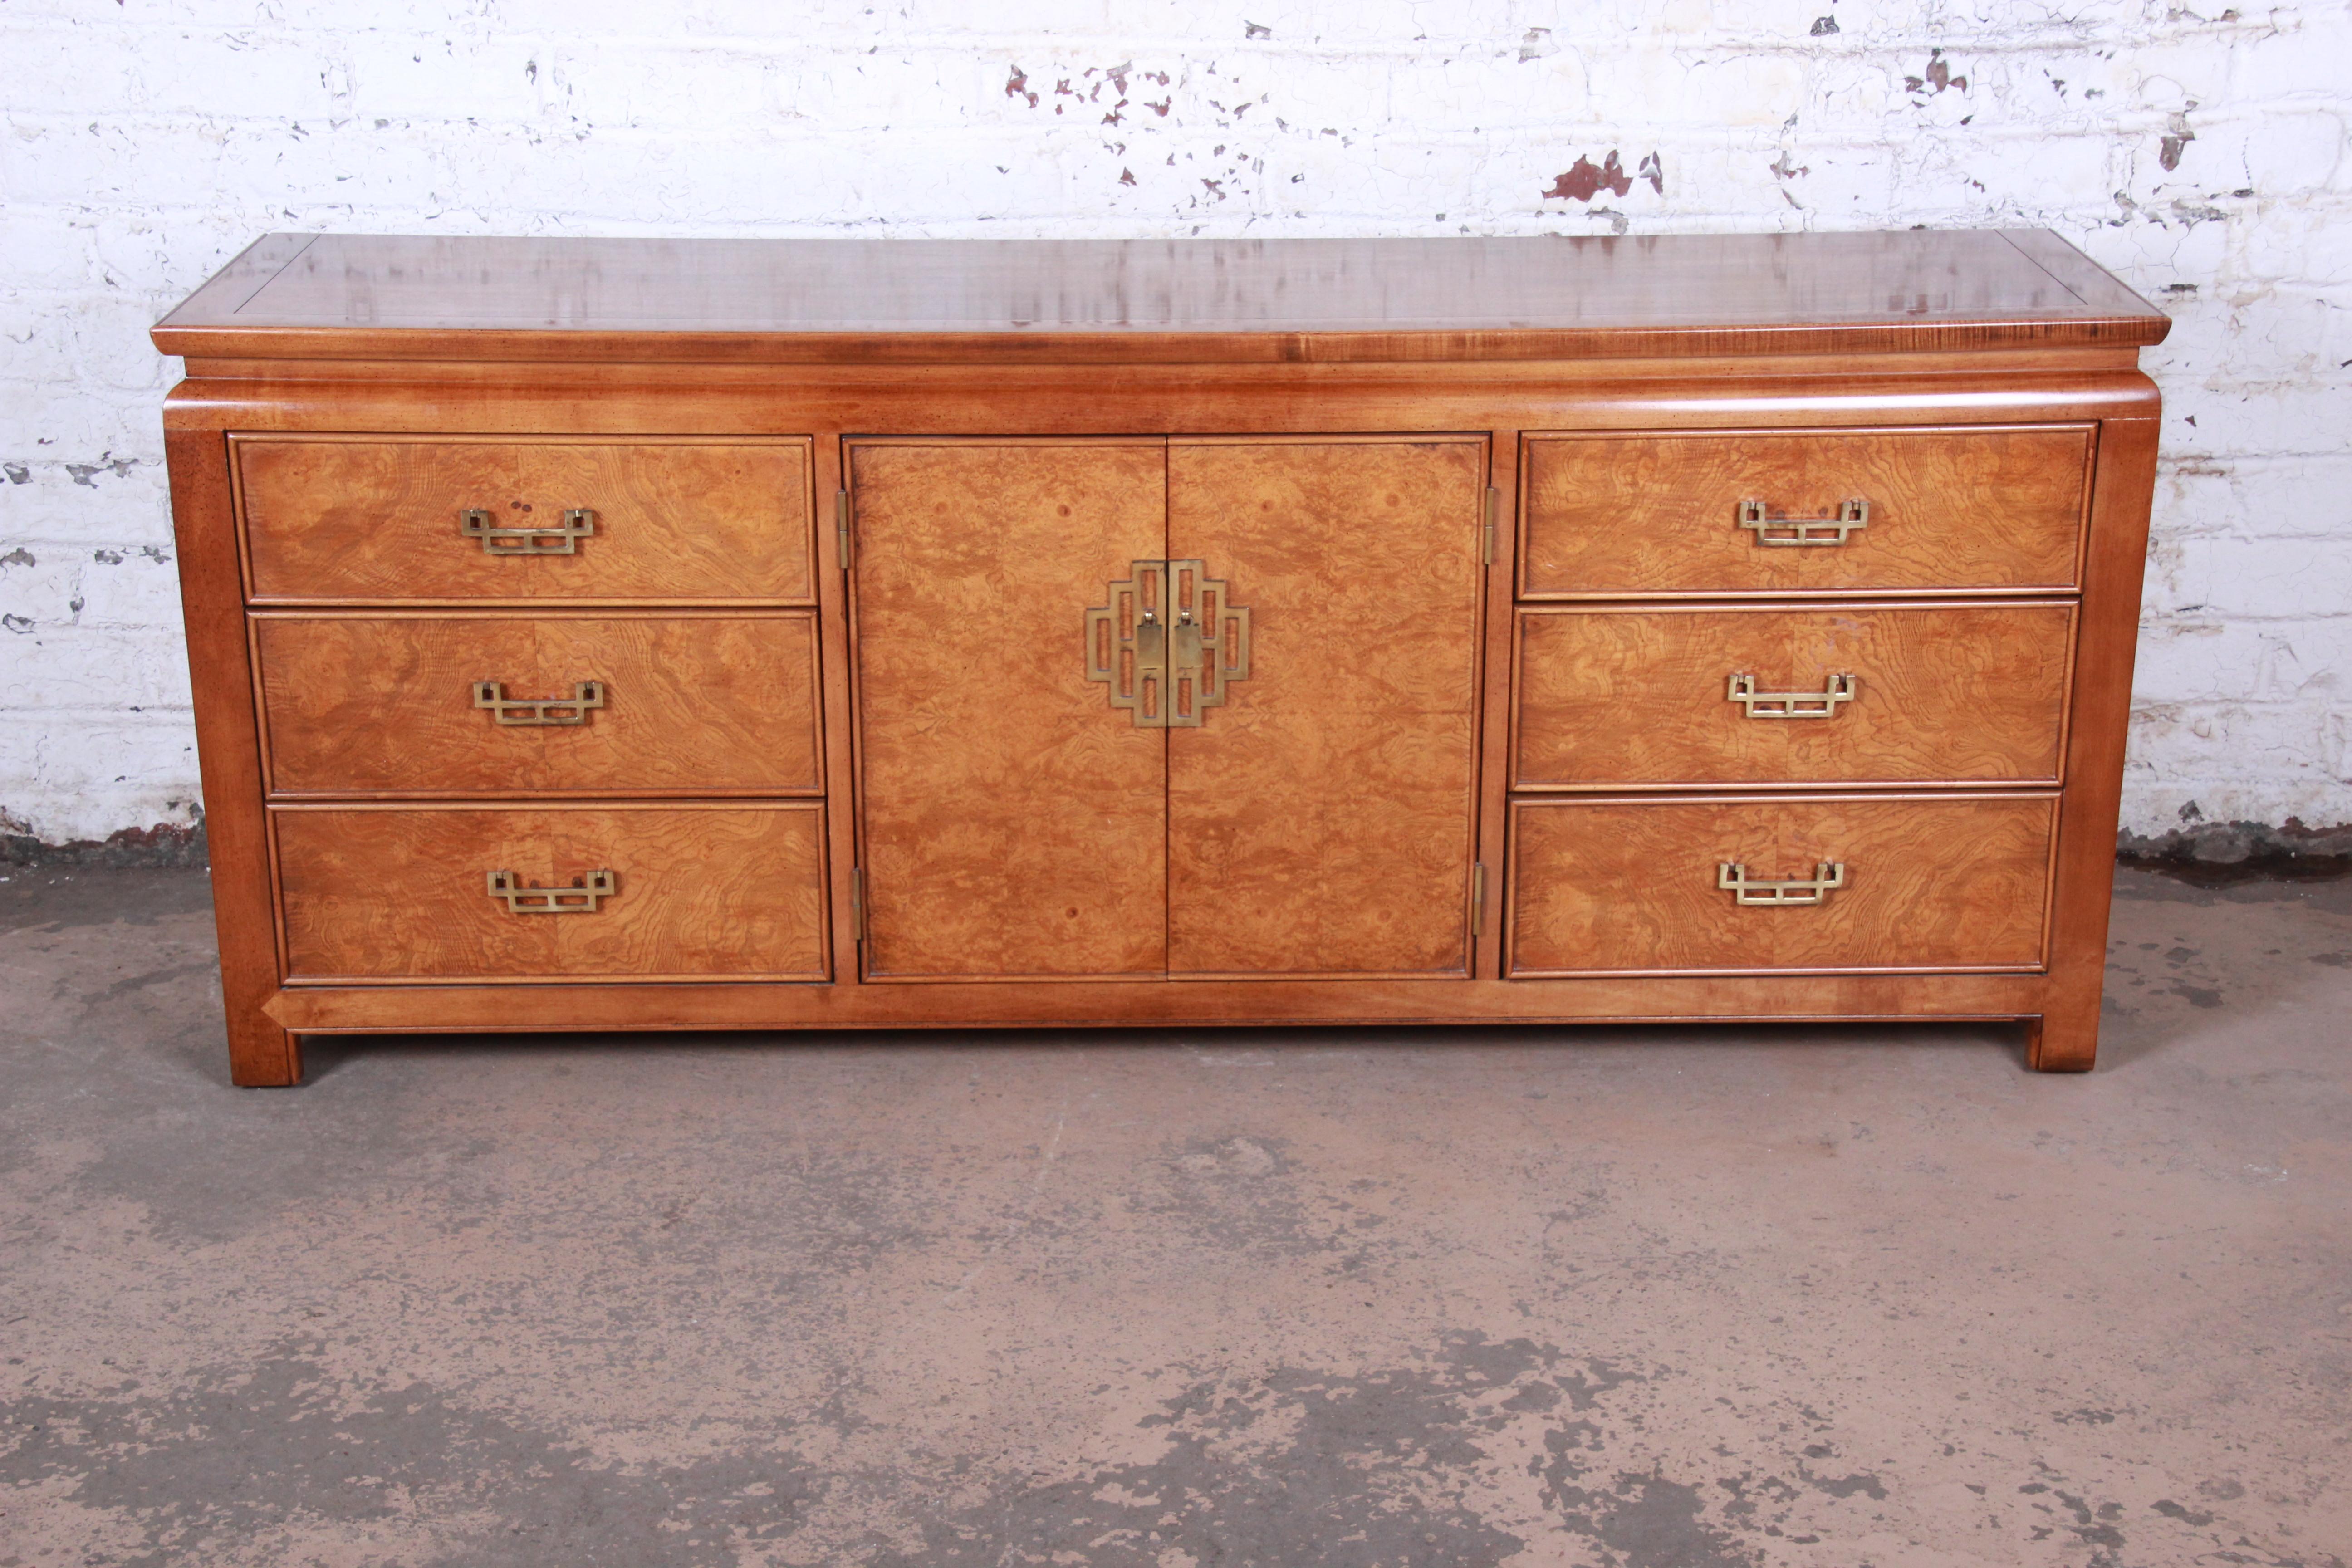 Midcentury Hollywood Regency chinoiserie triple dresser or credenza

Made by Century Furniture

USA, 1970s

Olive ash burl + mahogany + Asian inspired brass hardware

Measures: 76